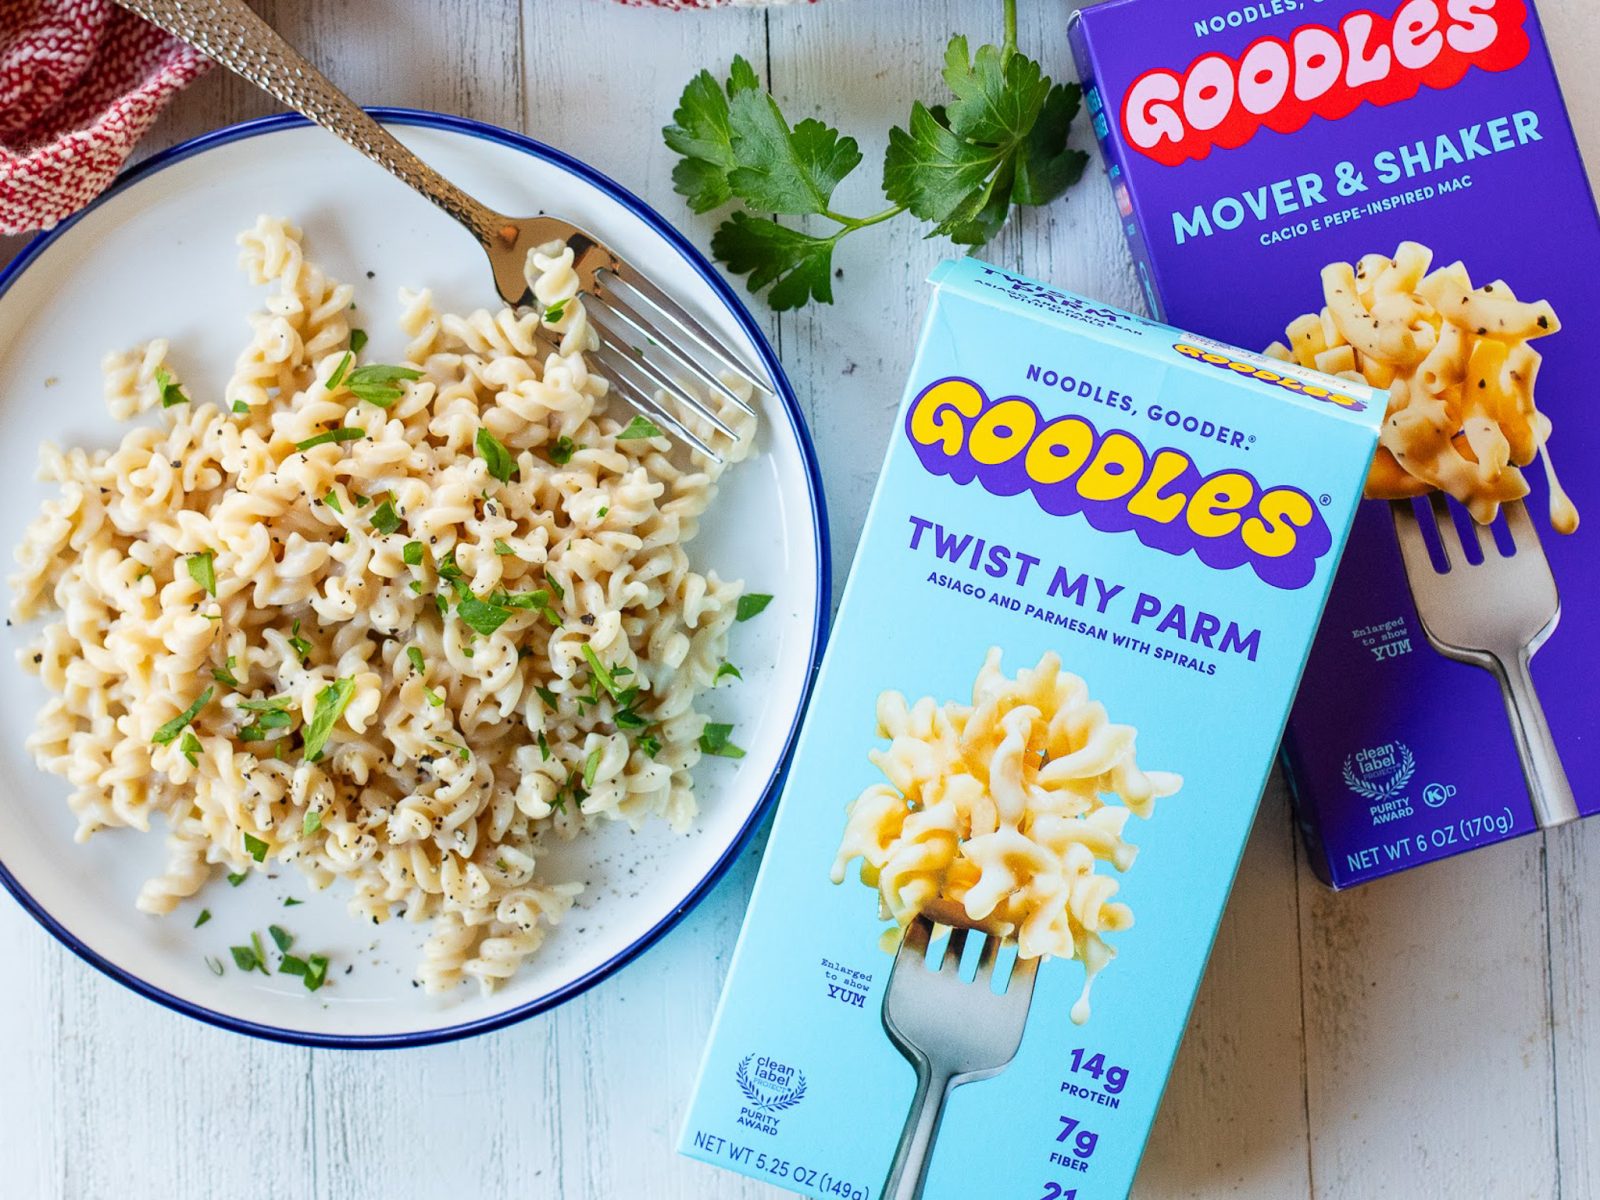 Get The Boxes Of Goodles Mac & Cheese For Just $2.99 At Kroger